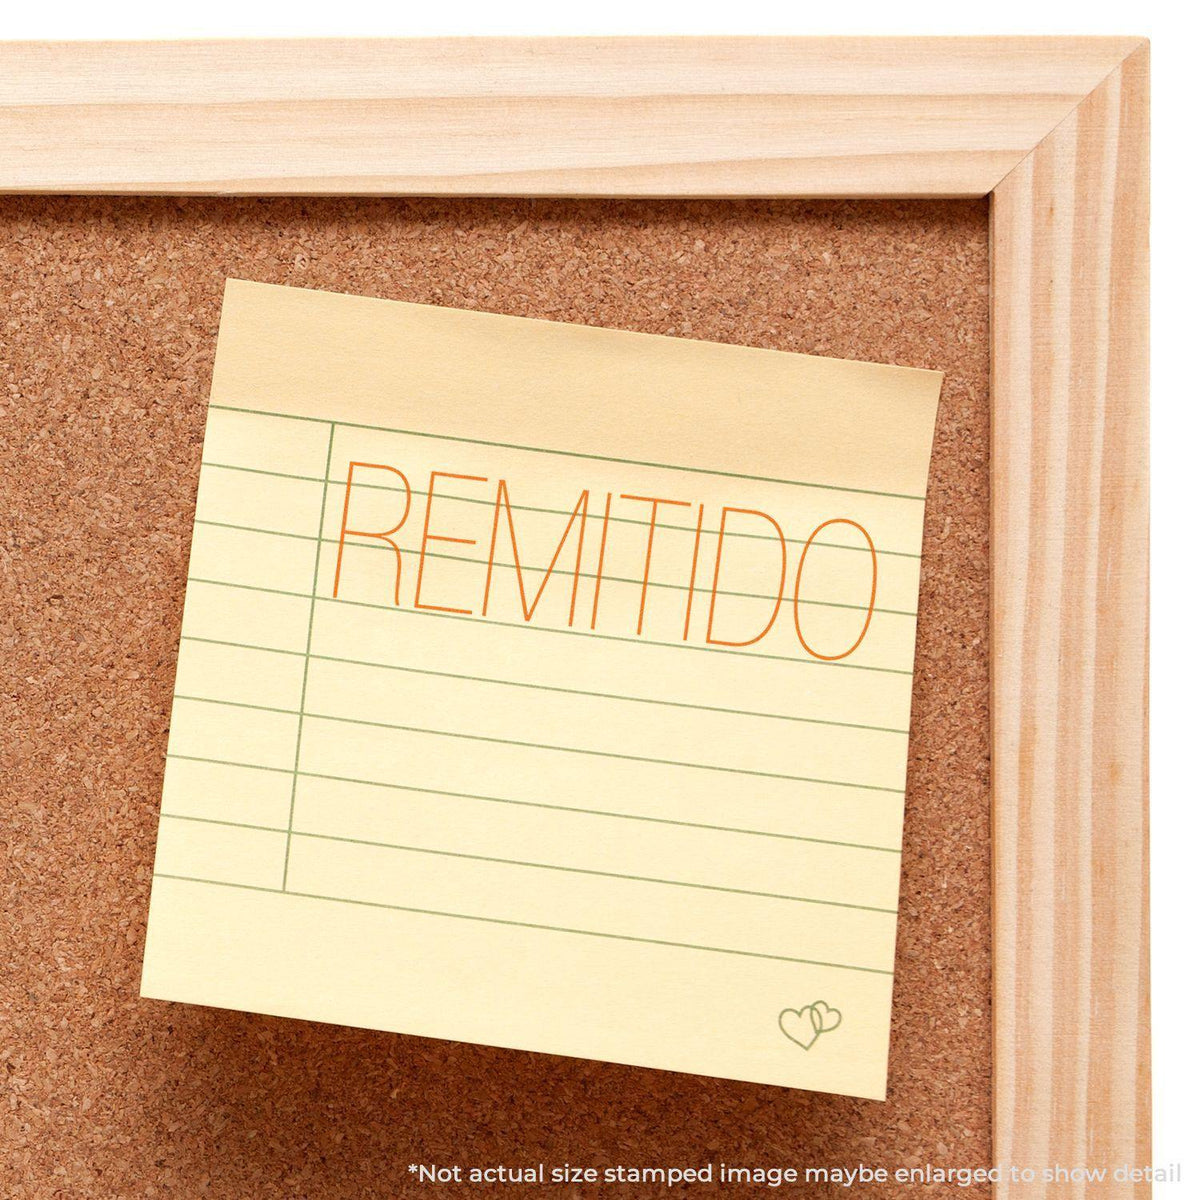 Large Remitido Rubber Stamp In Use Photo